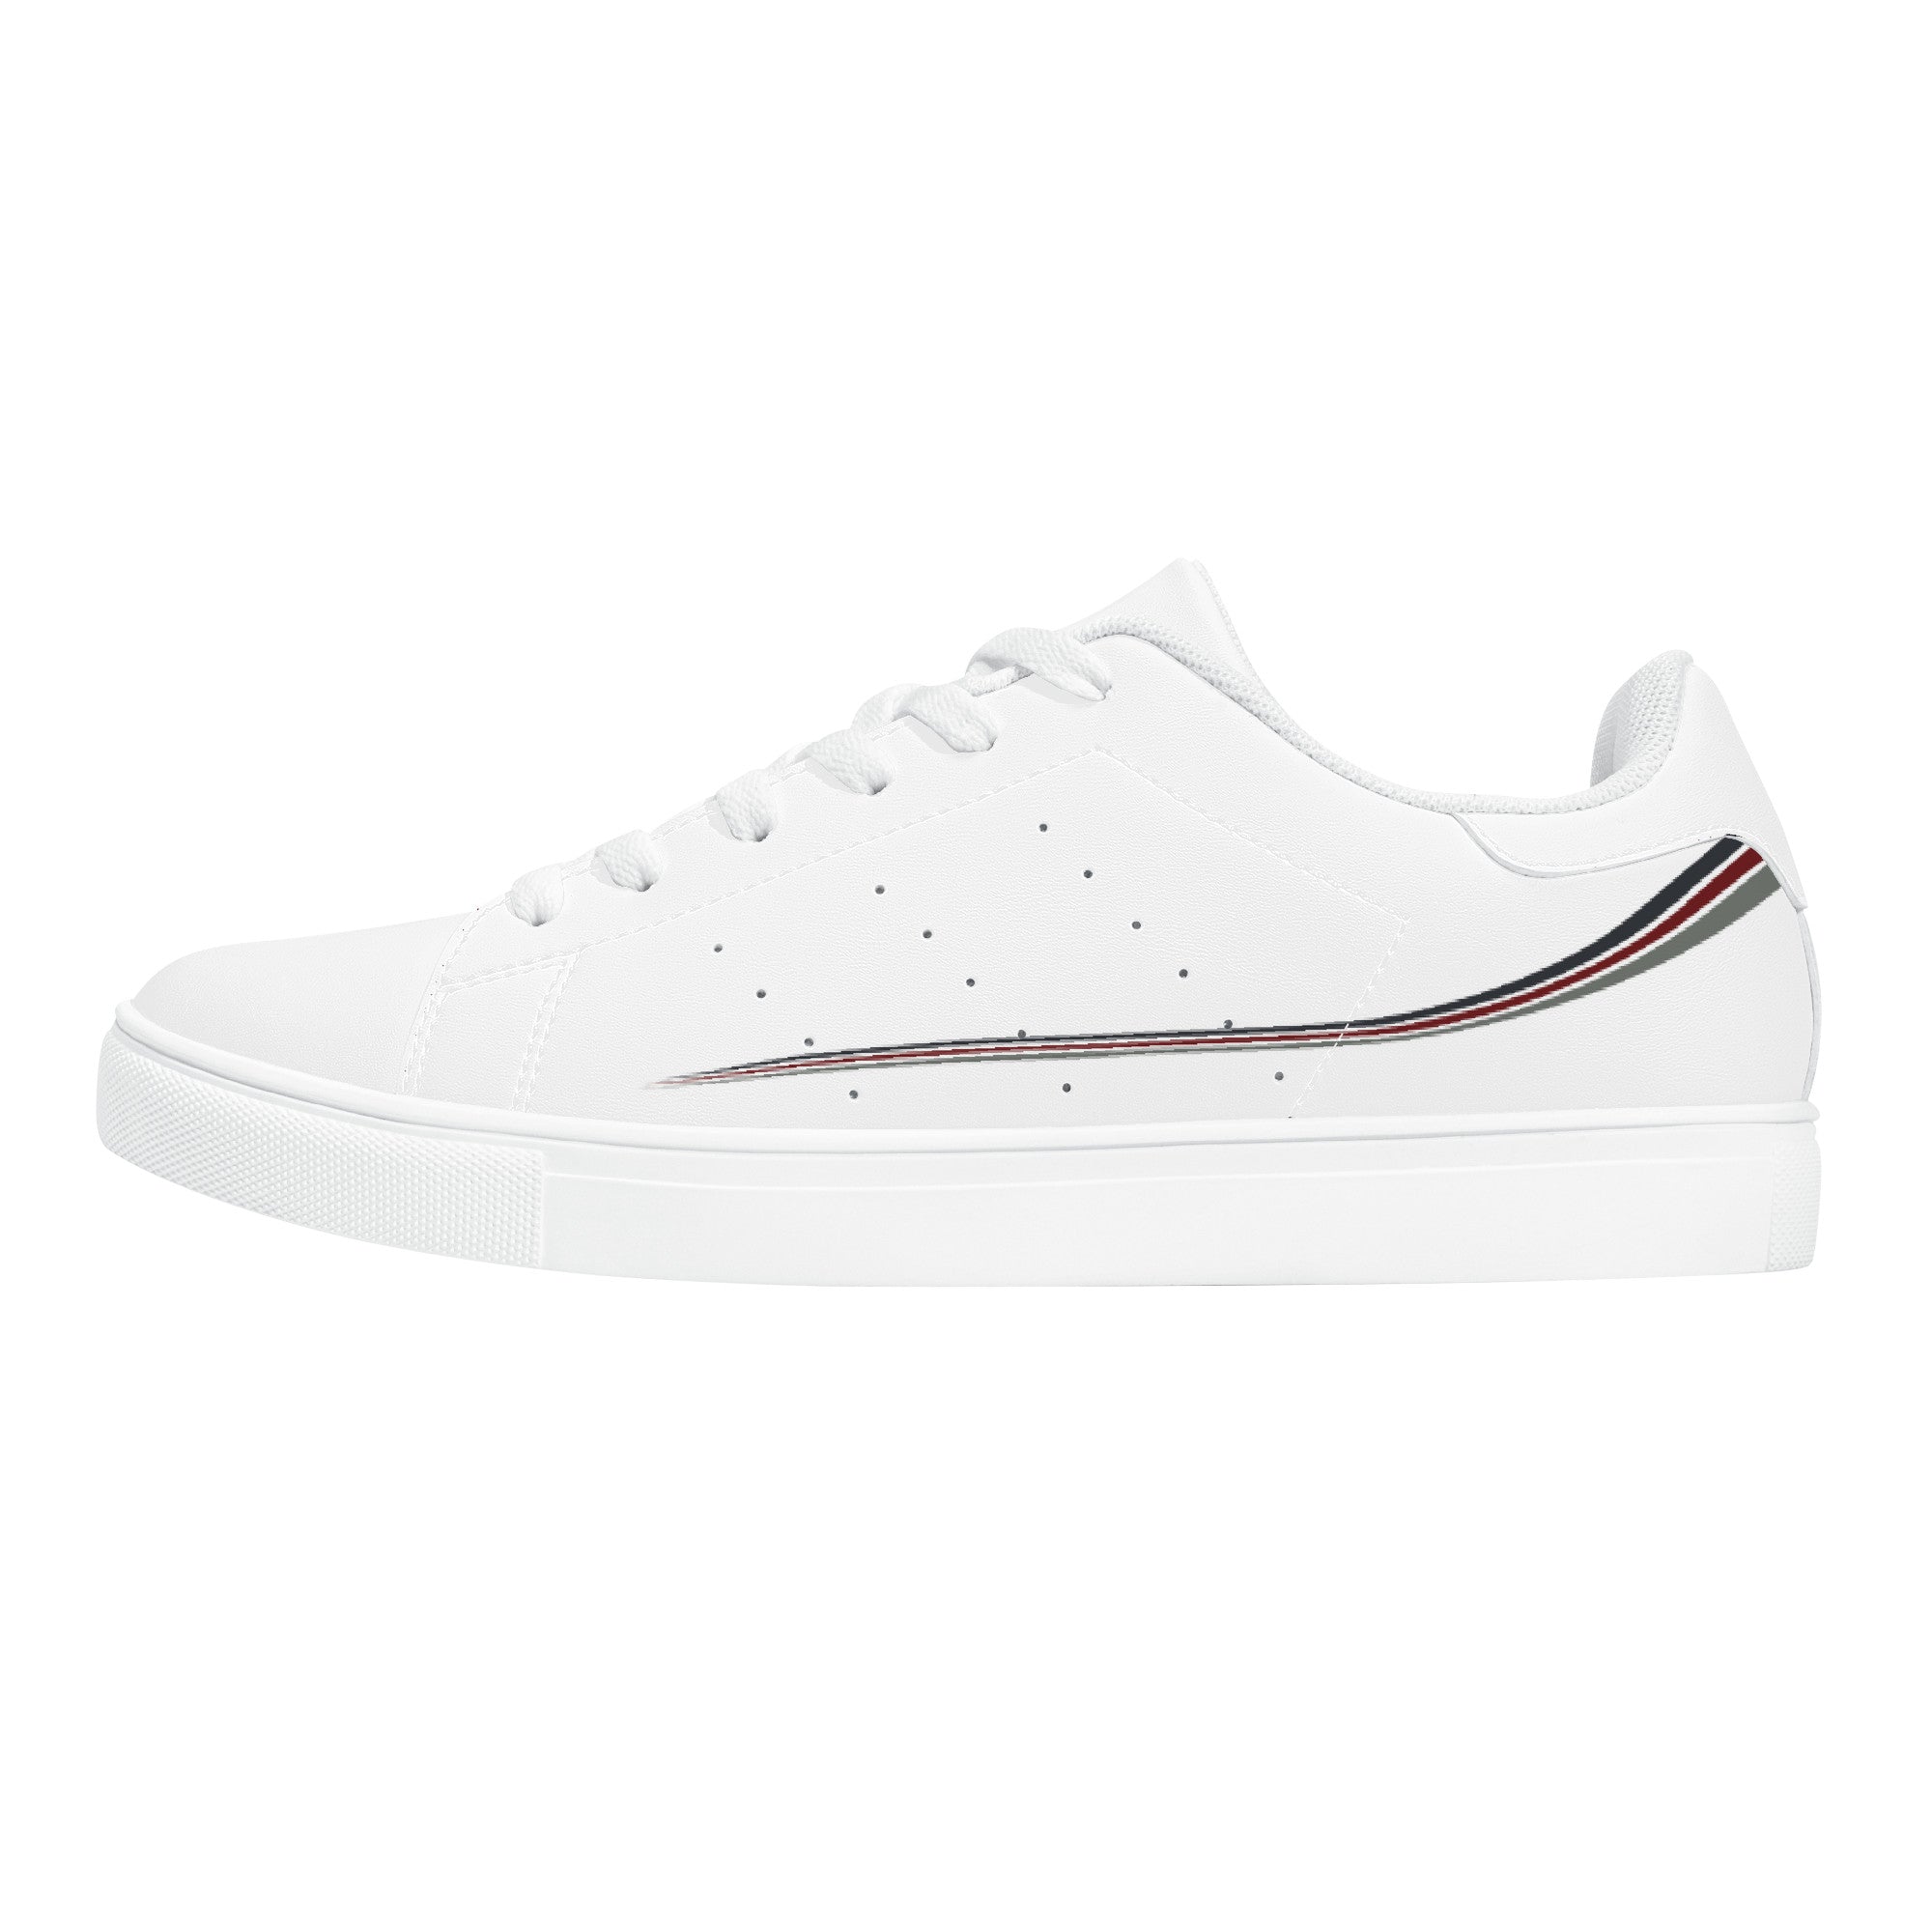 Net Jets V1 | Customized Low-Top Synthetic Leather Sneakers - White - Shoe Zero